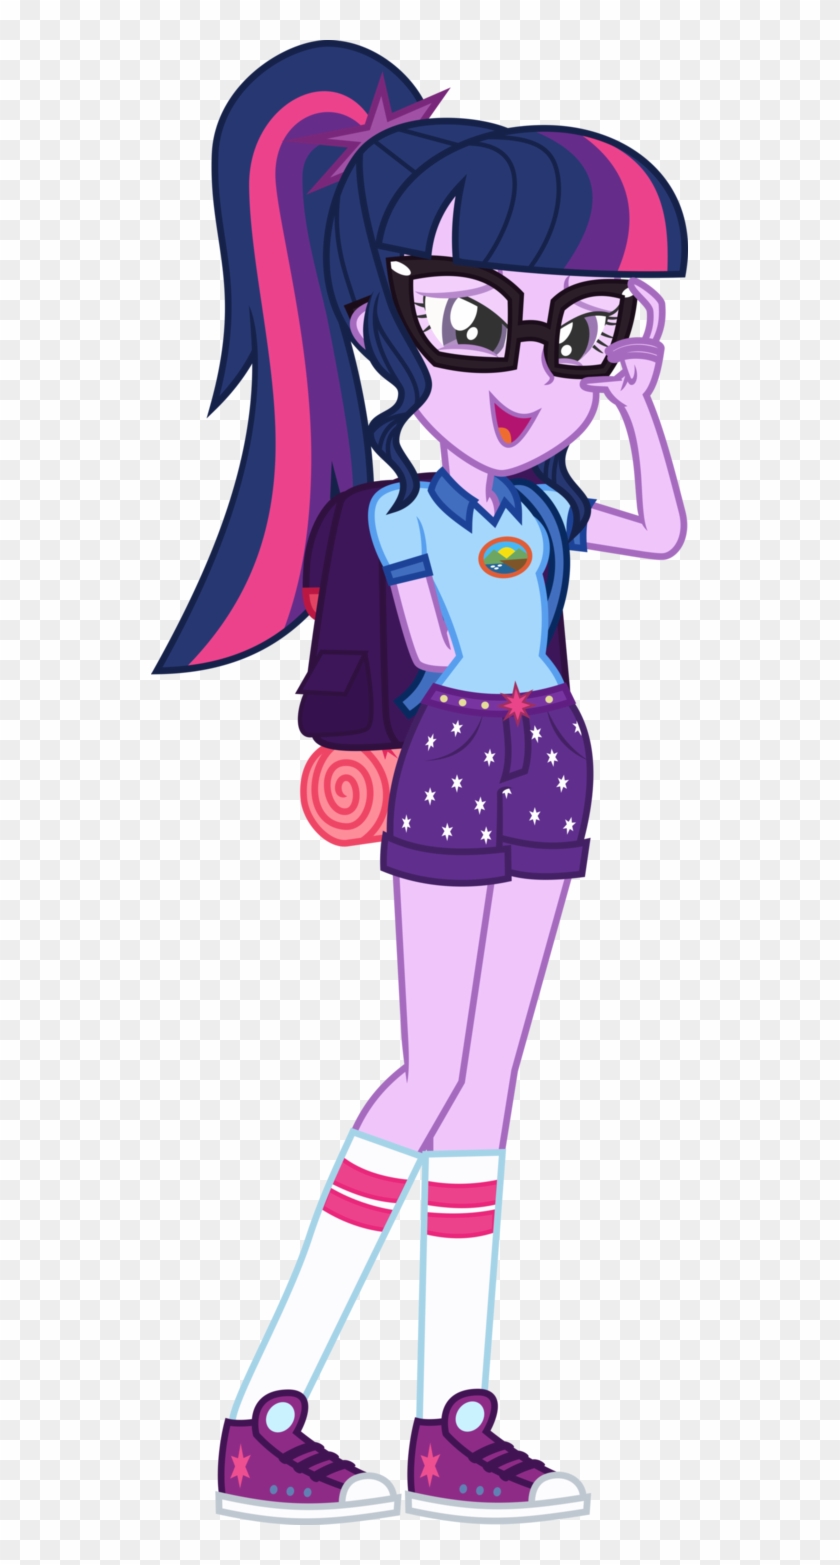 Twilight Admirable By Uponia - My Little Pony: Friendship Is Magic #648158